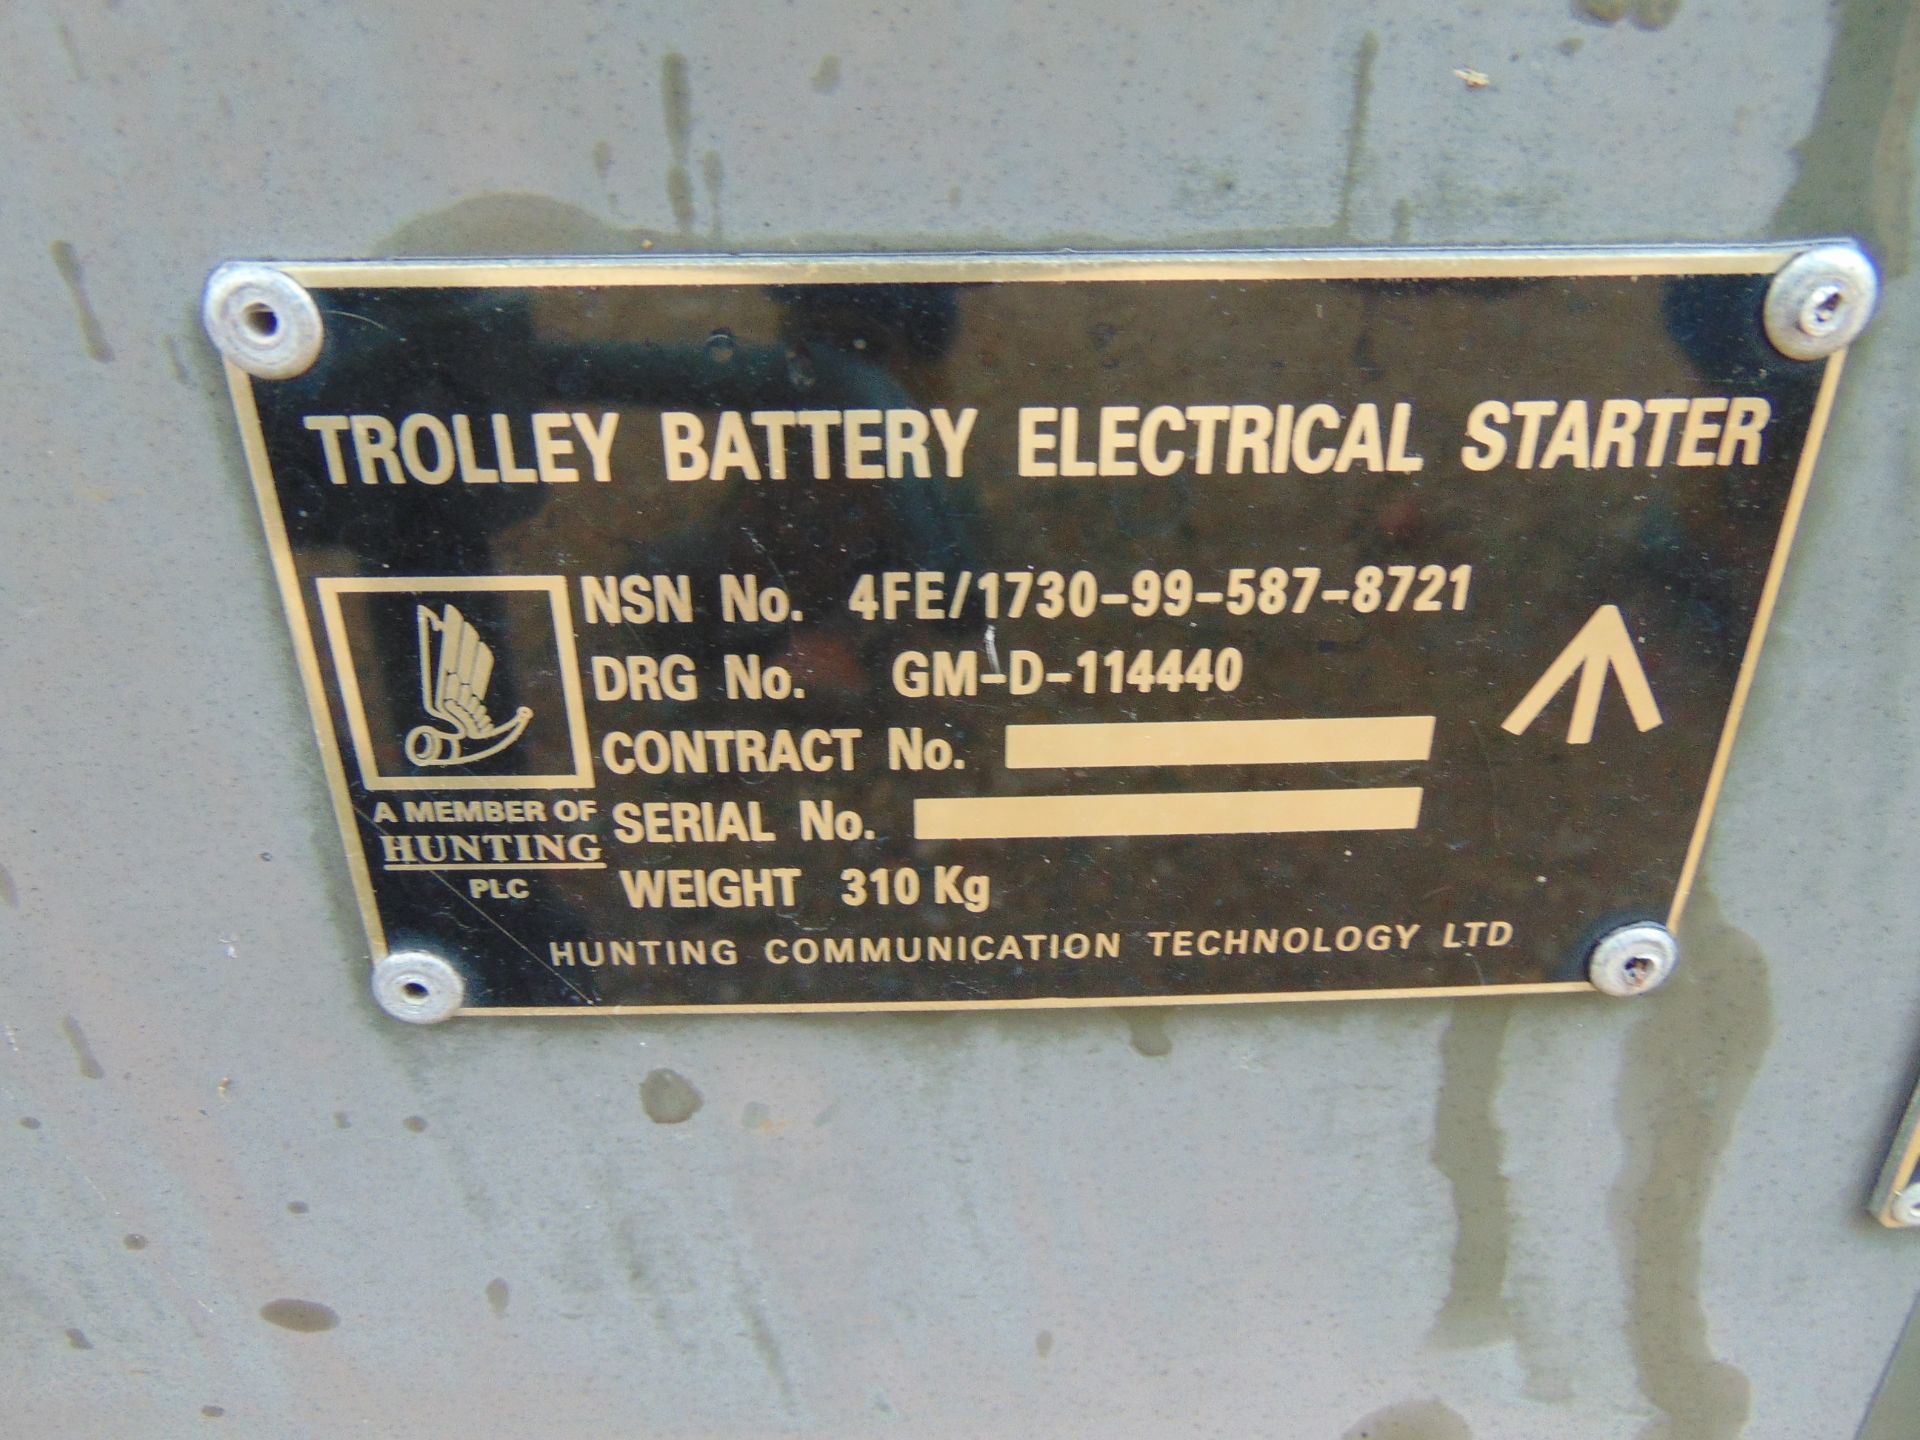 Aircraft Battery Electrical Starter Trolley c/w Batteries and Cables, From RAF - Image 8 of 8